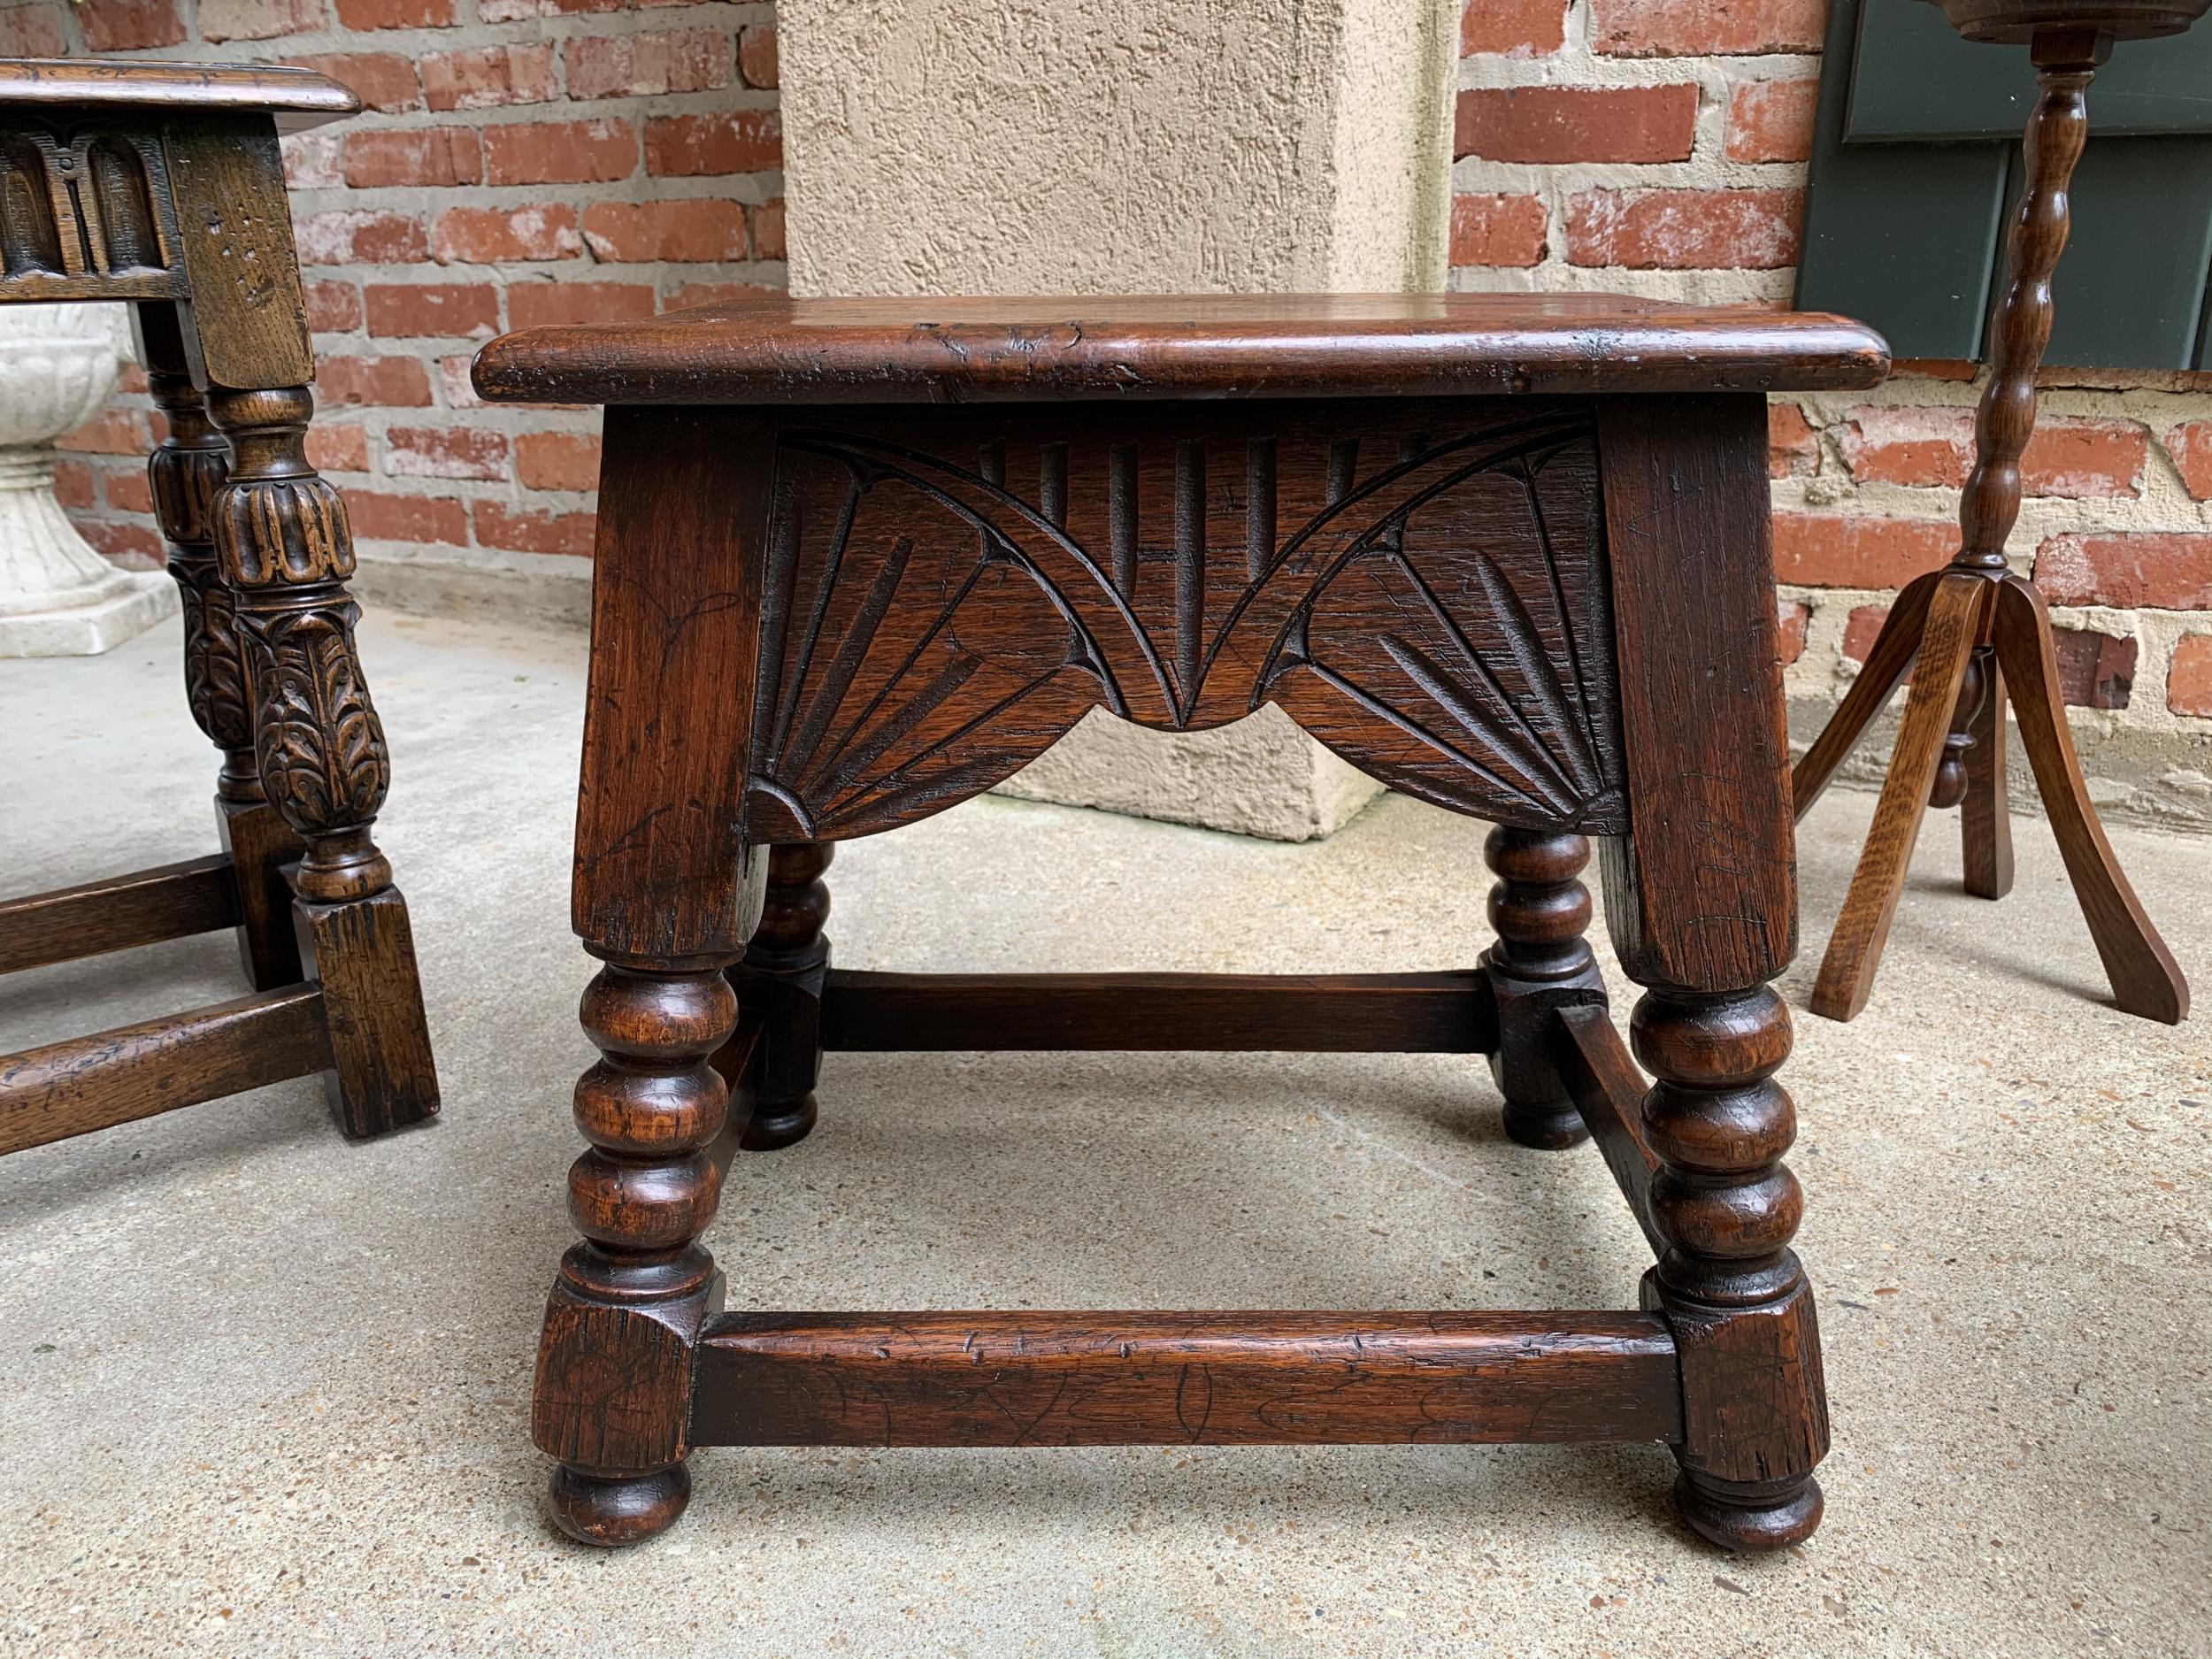 British Antique English Carved Oak Bench Stool End Table Jacobean Joint Style Stand